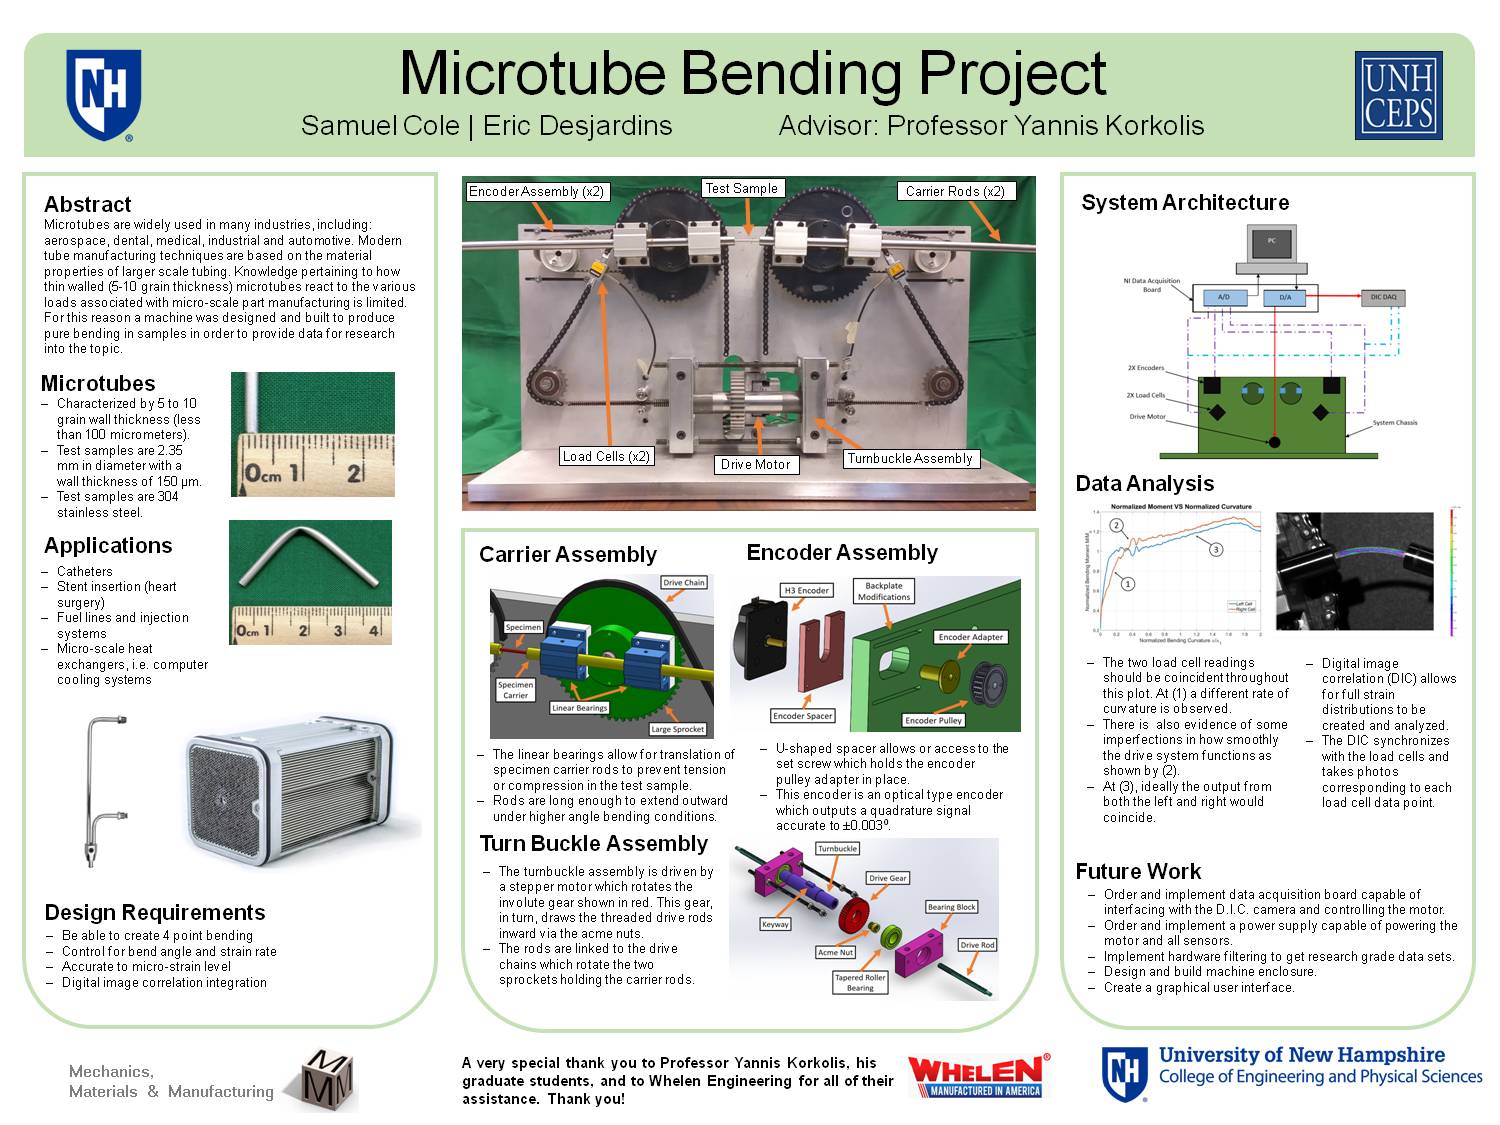 Microtube Bending Project by sbm34